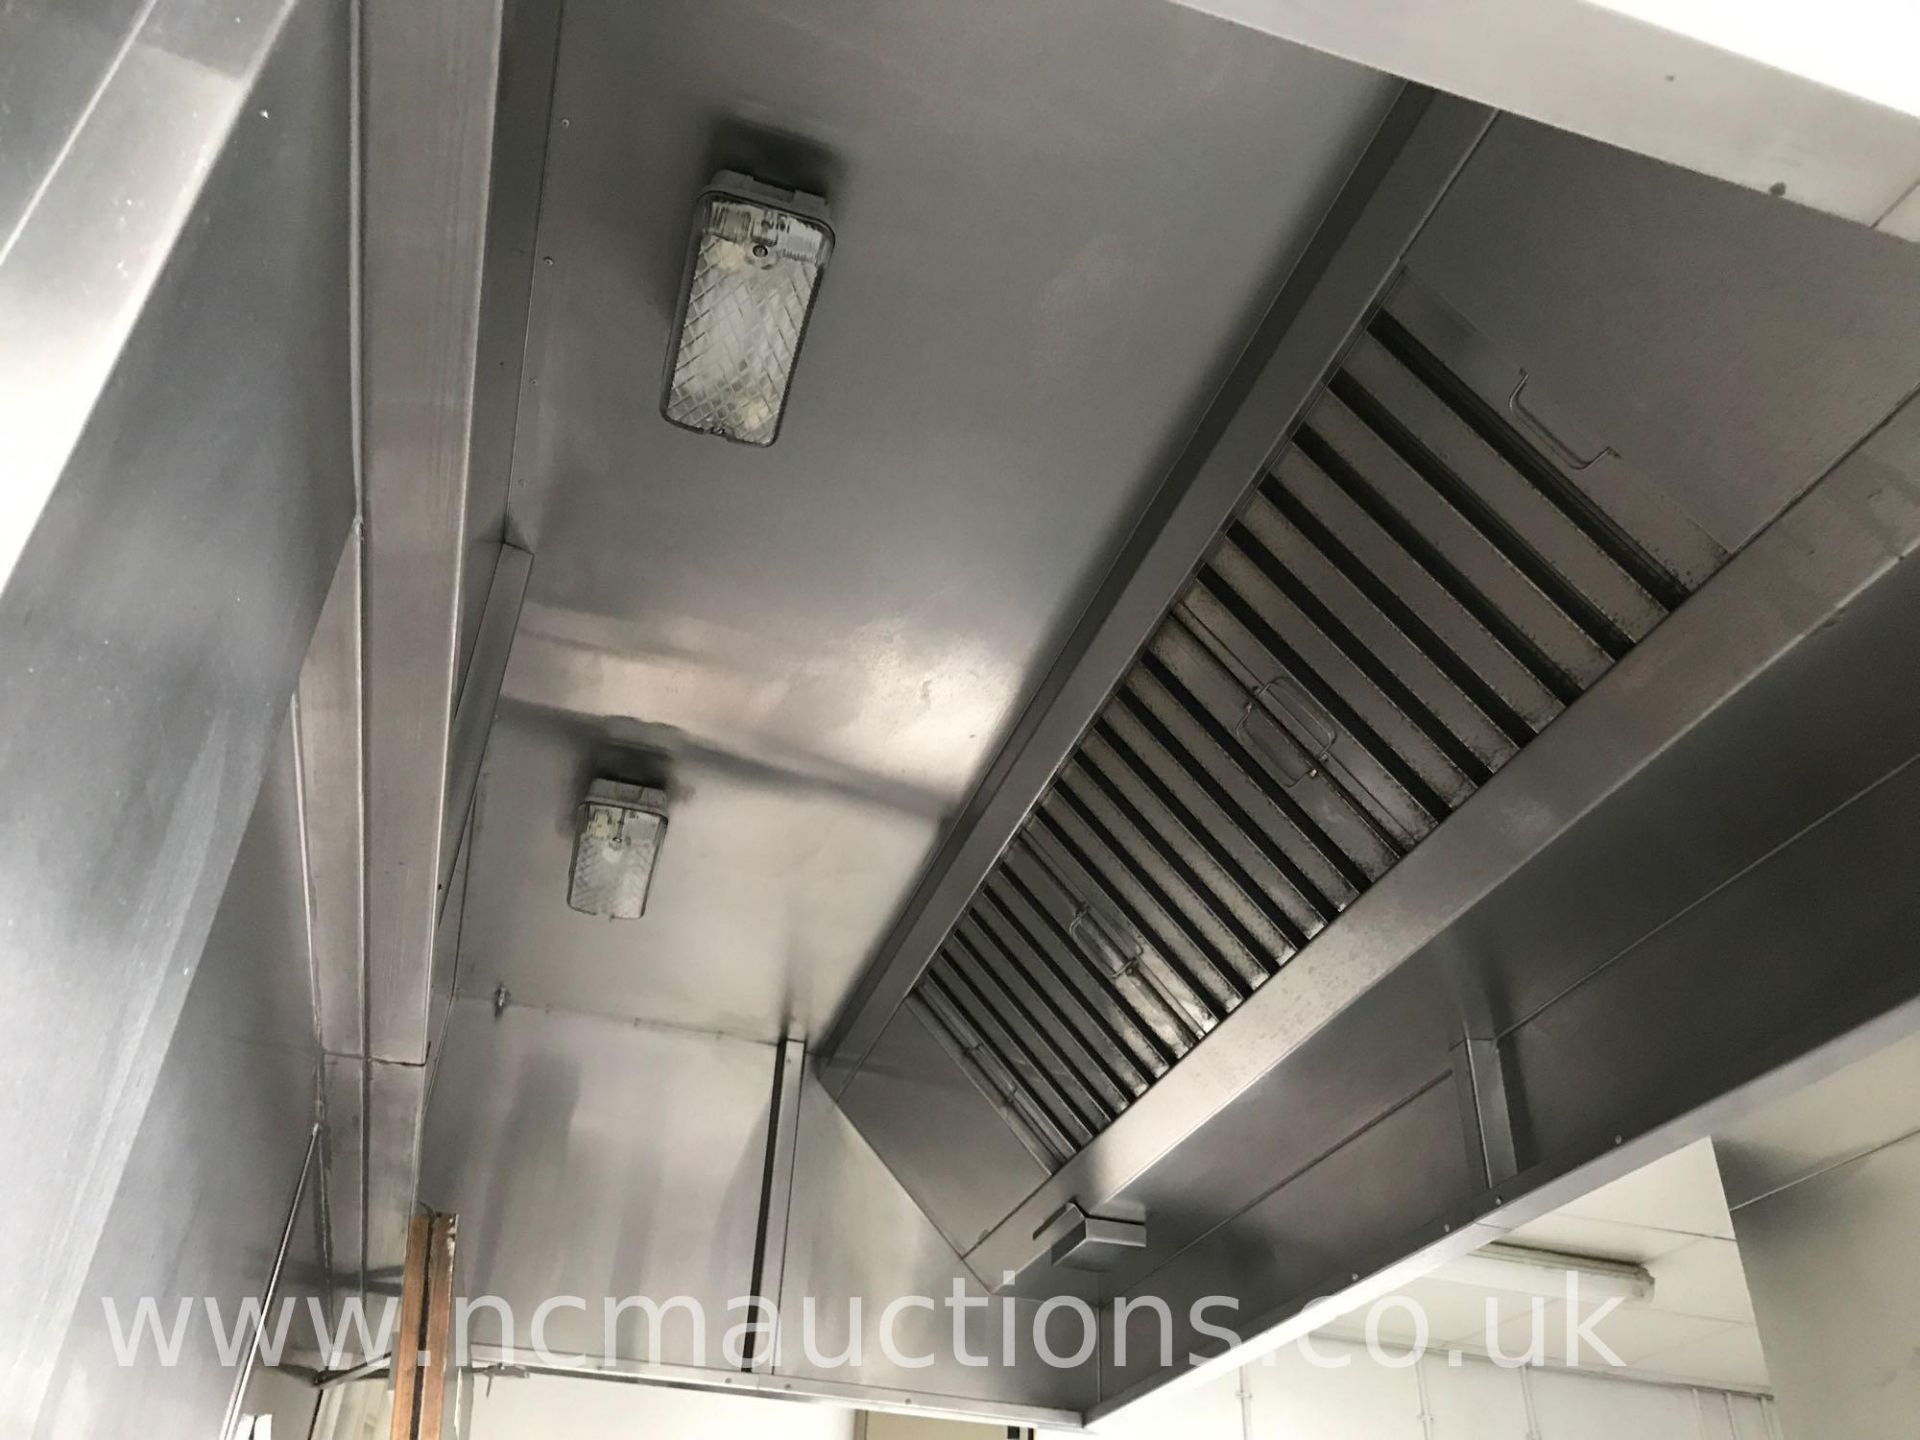 Stainless Steel Extraction Unit - Image 3 of 3